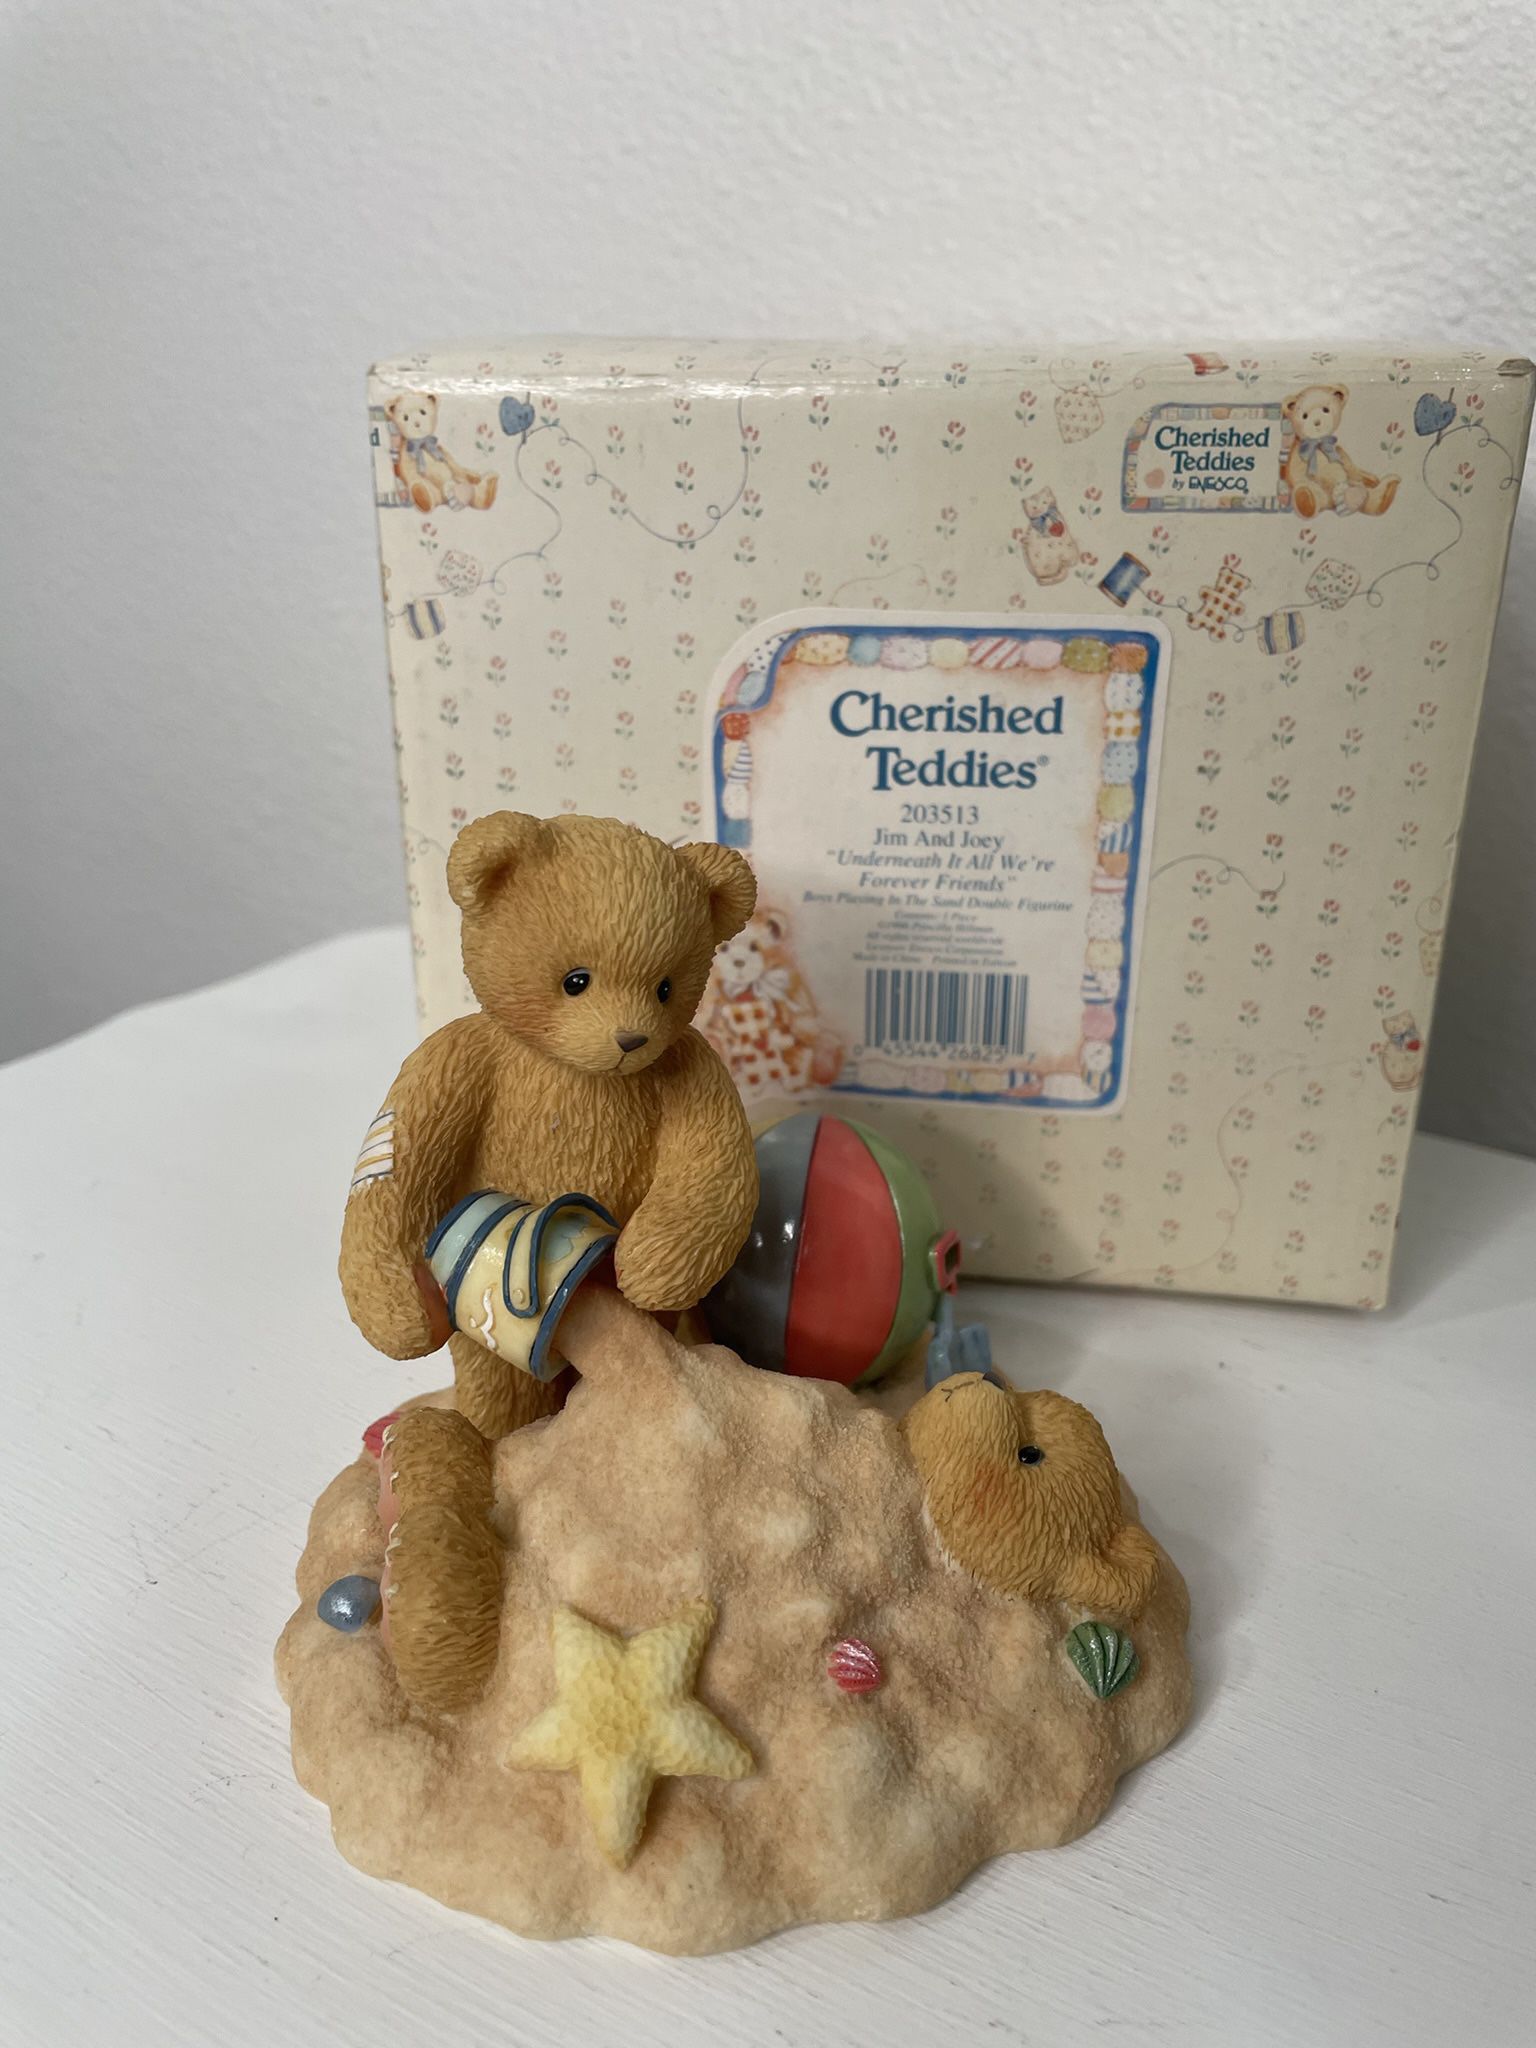 1996 Cherished Teddies Jim And Joey "Underneath It All We're Forever Friends" With Box- Enesco 